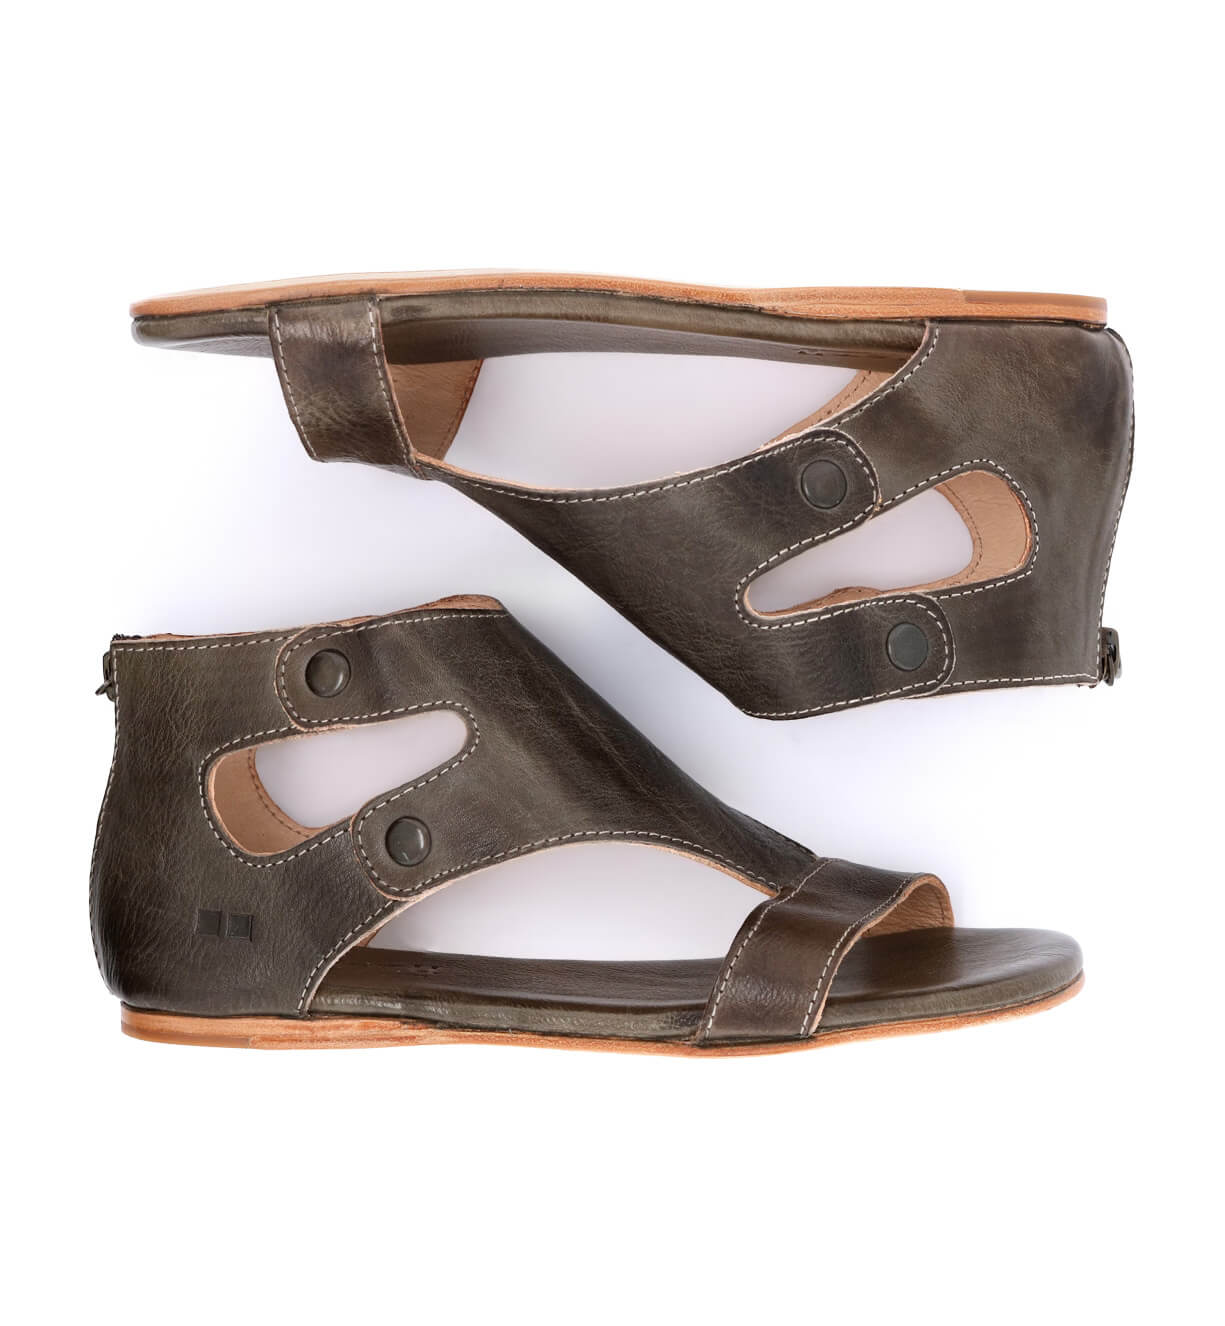 A pair of Bed Stu women's brown leather Soto sandals on a white background.